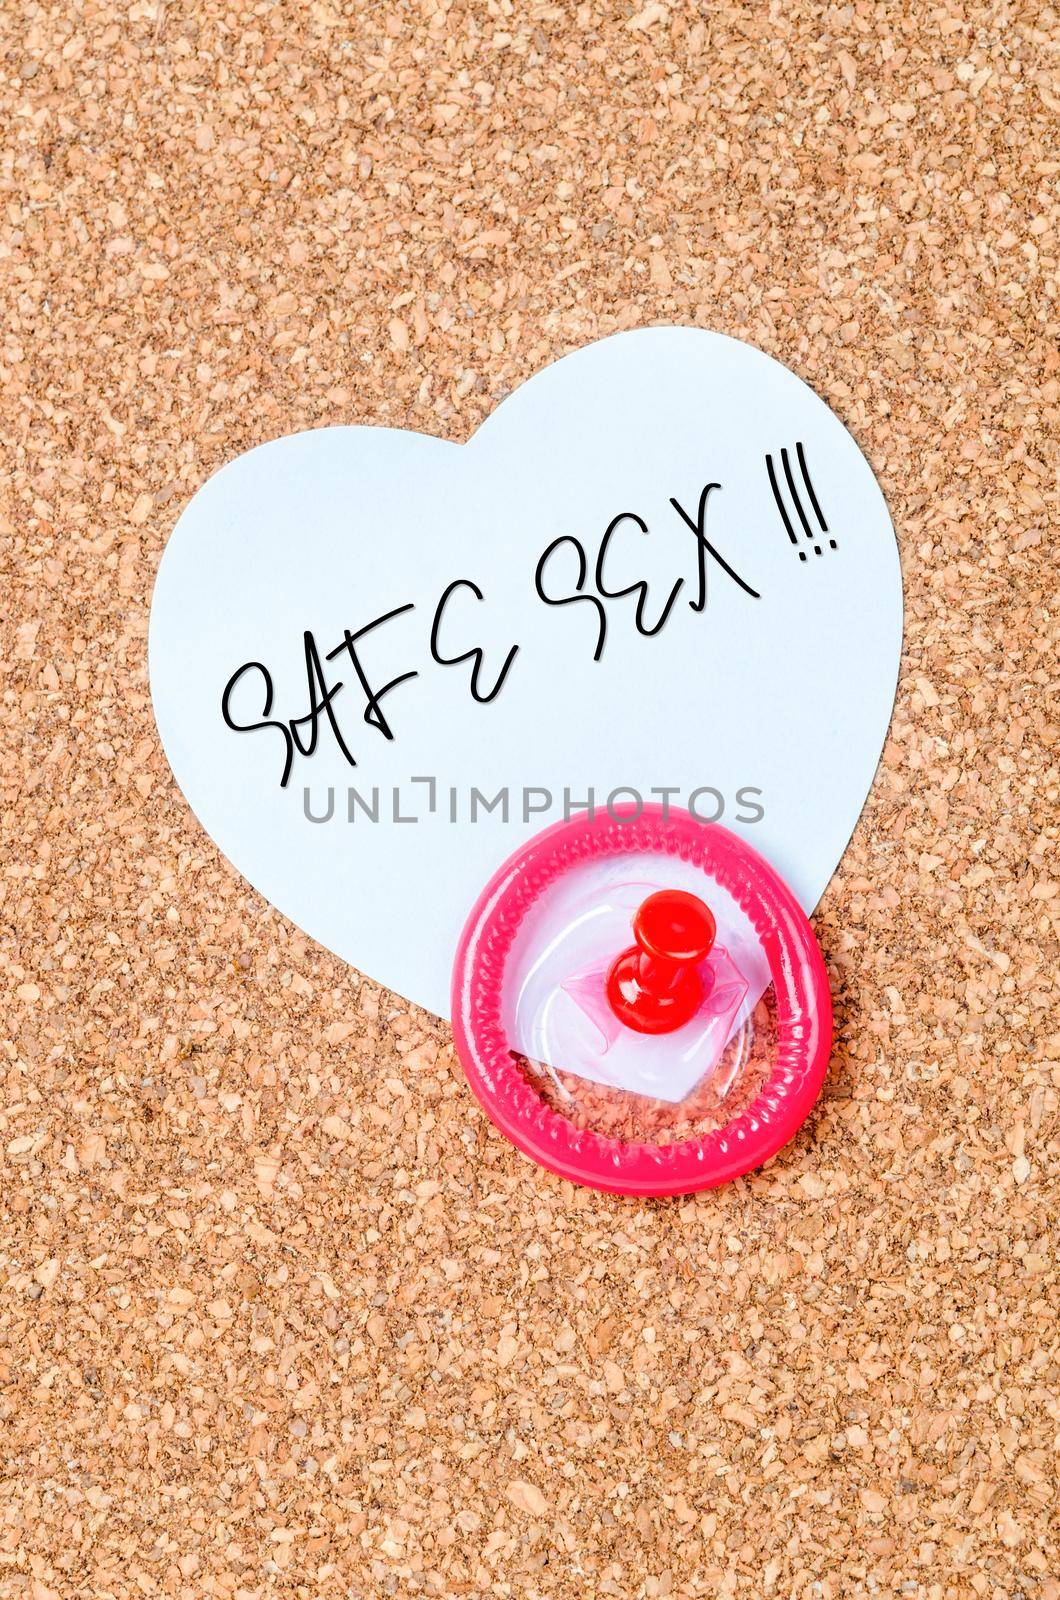 Safe sex message and condom with pin on wooden board for reminder, Prevention of HIV, AIDS concepts.